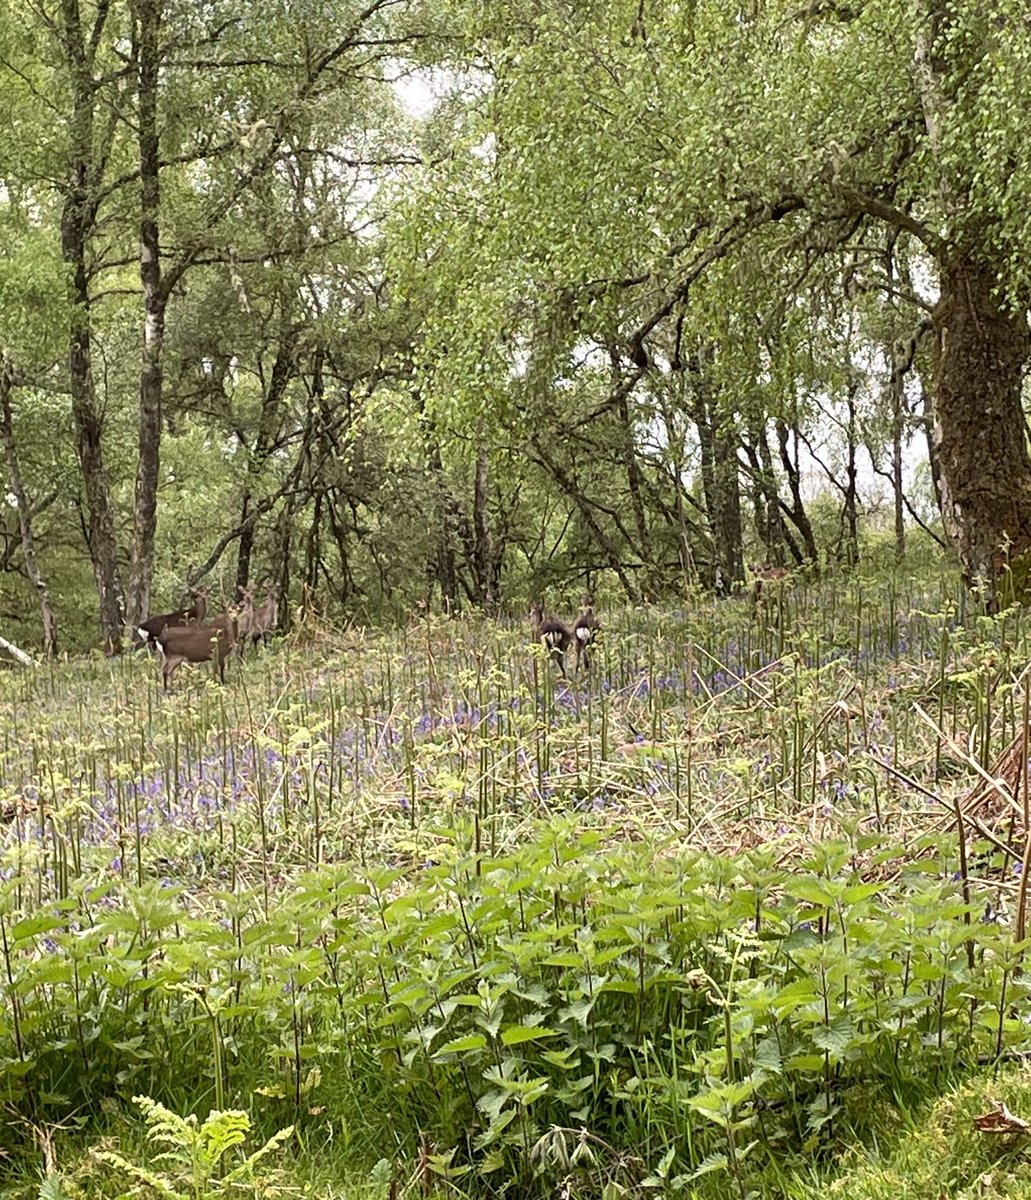 There were loads of deers today on our walk, lurking amongst the bracken and the bluebells. I barked, but as usual, they more or less ignored me 😡